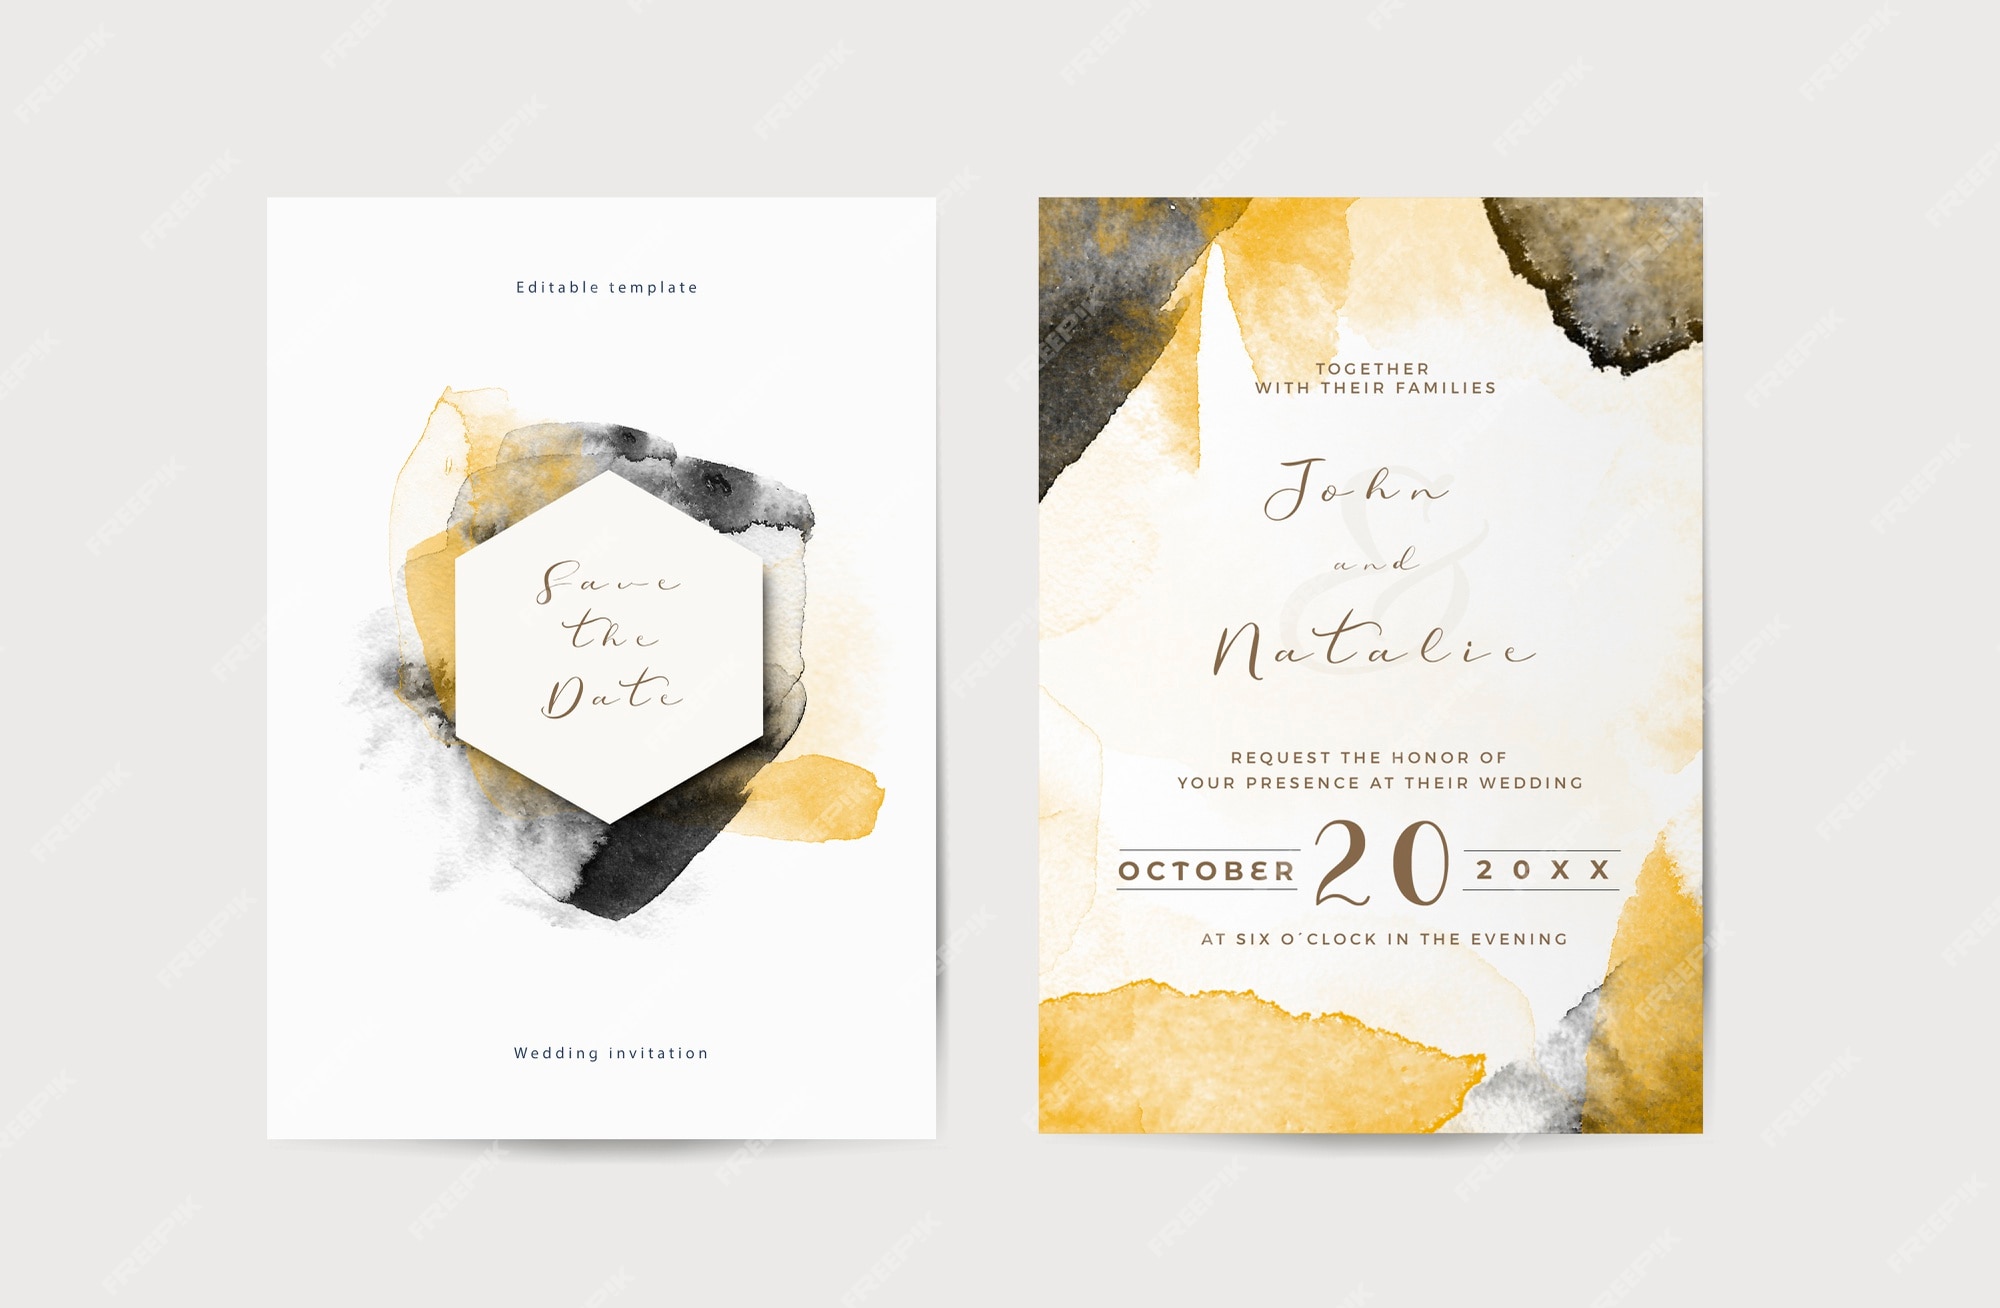 abstract invitation images - free download on freepik